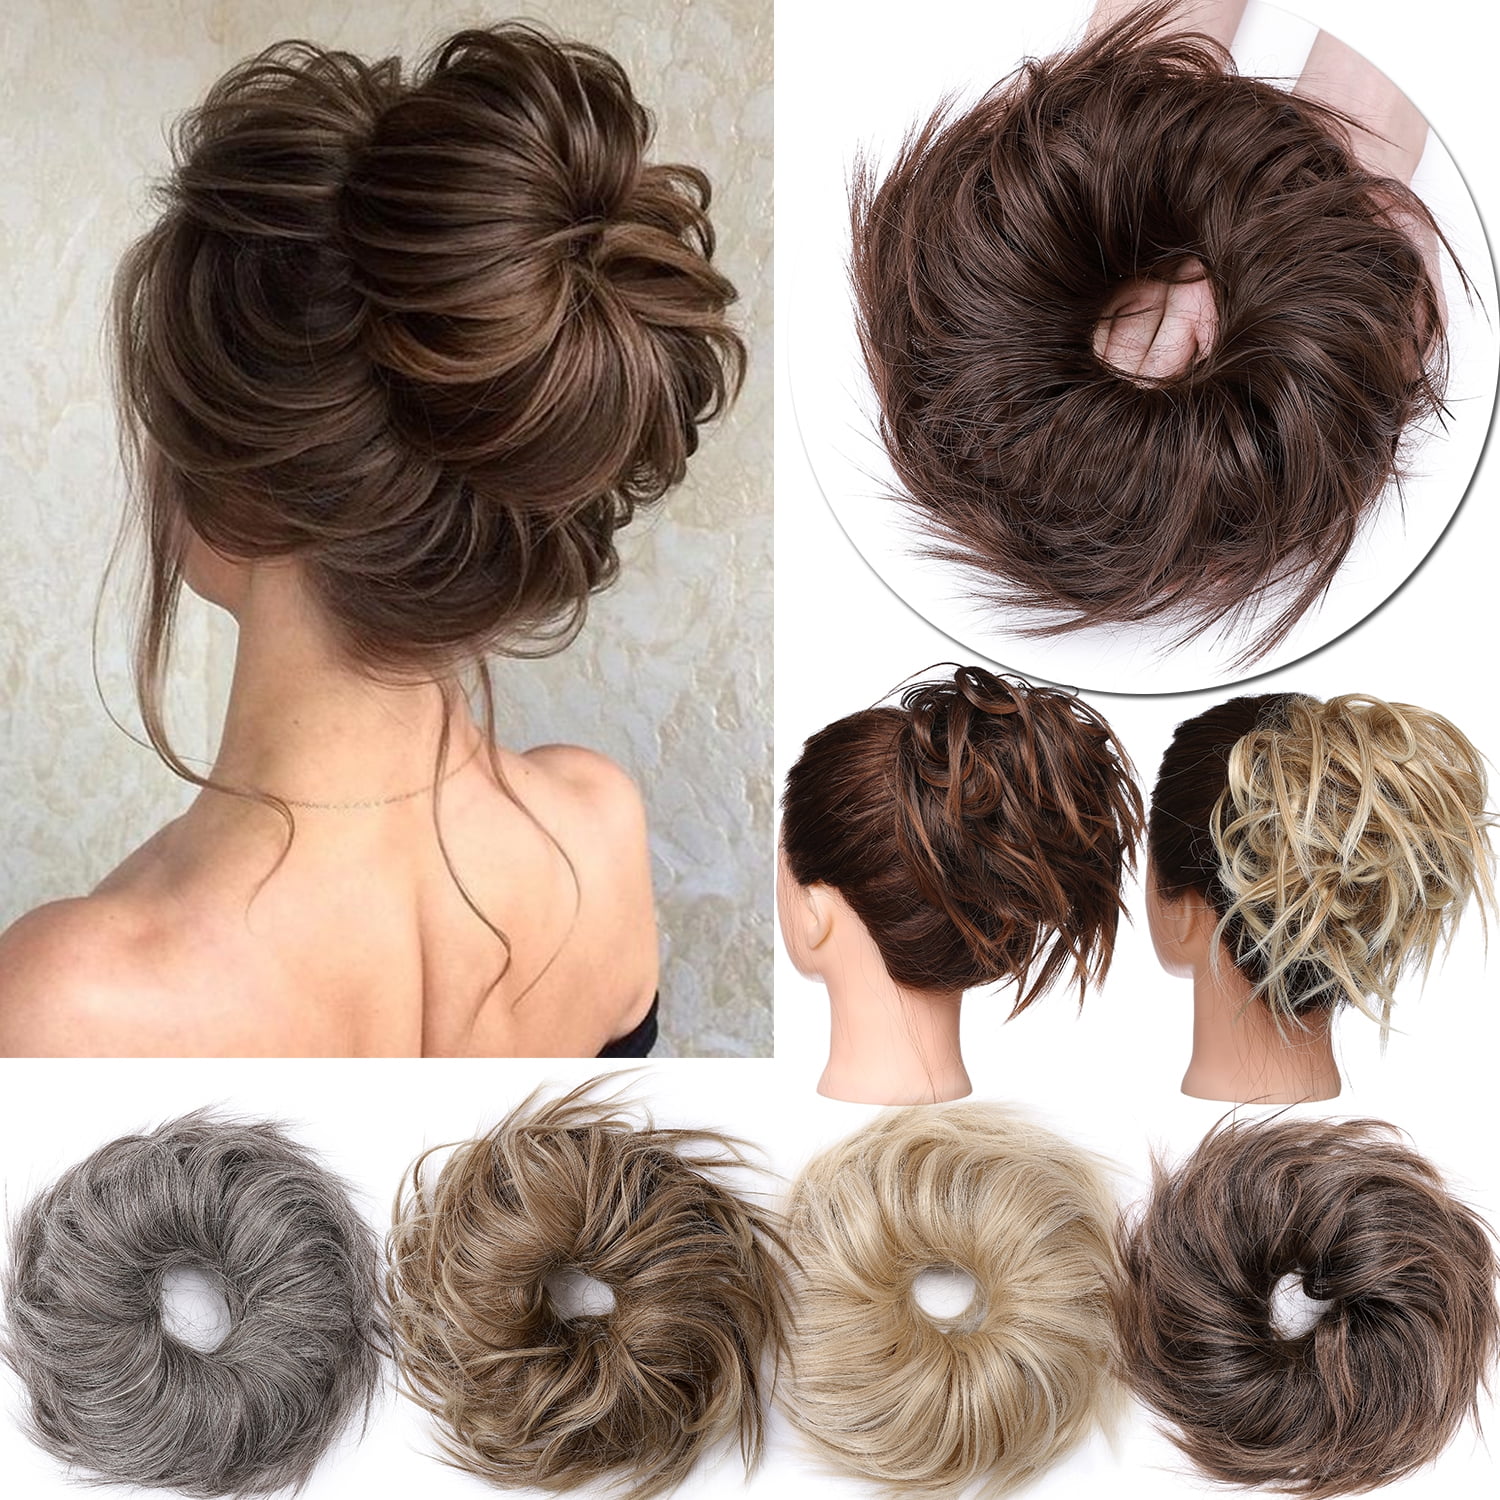 InKach Short Curly Hair Bun Extensions Synthetic Wig for Black Women Wavy Messy Donut Chignons Hair Pieces Ponytail Bun Ties Holder Easy-To-Wear, B 